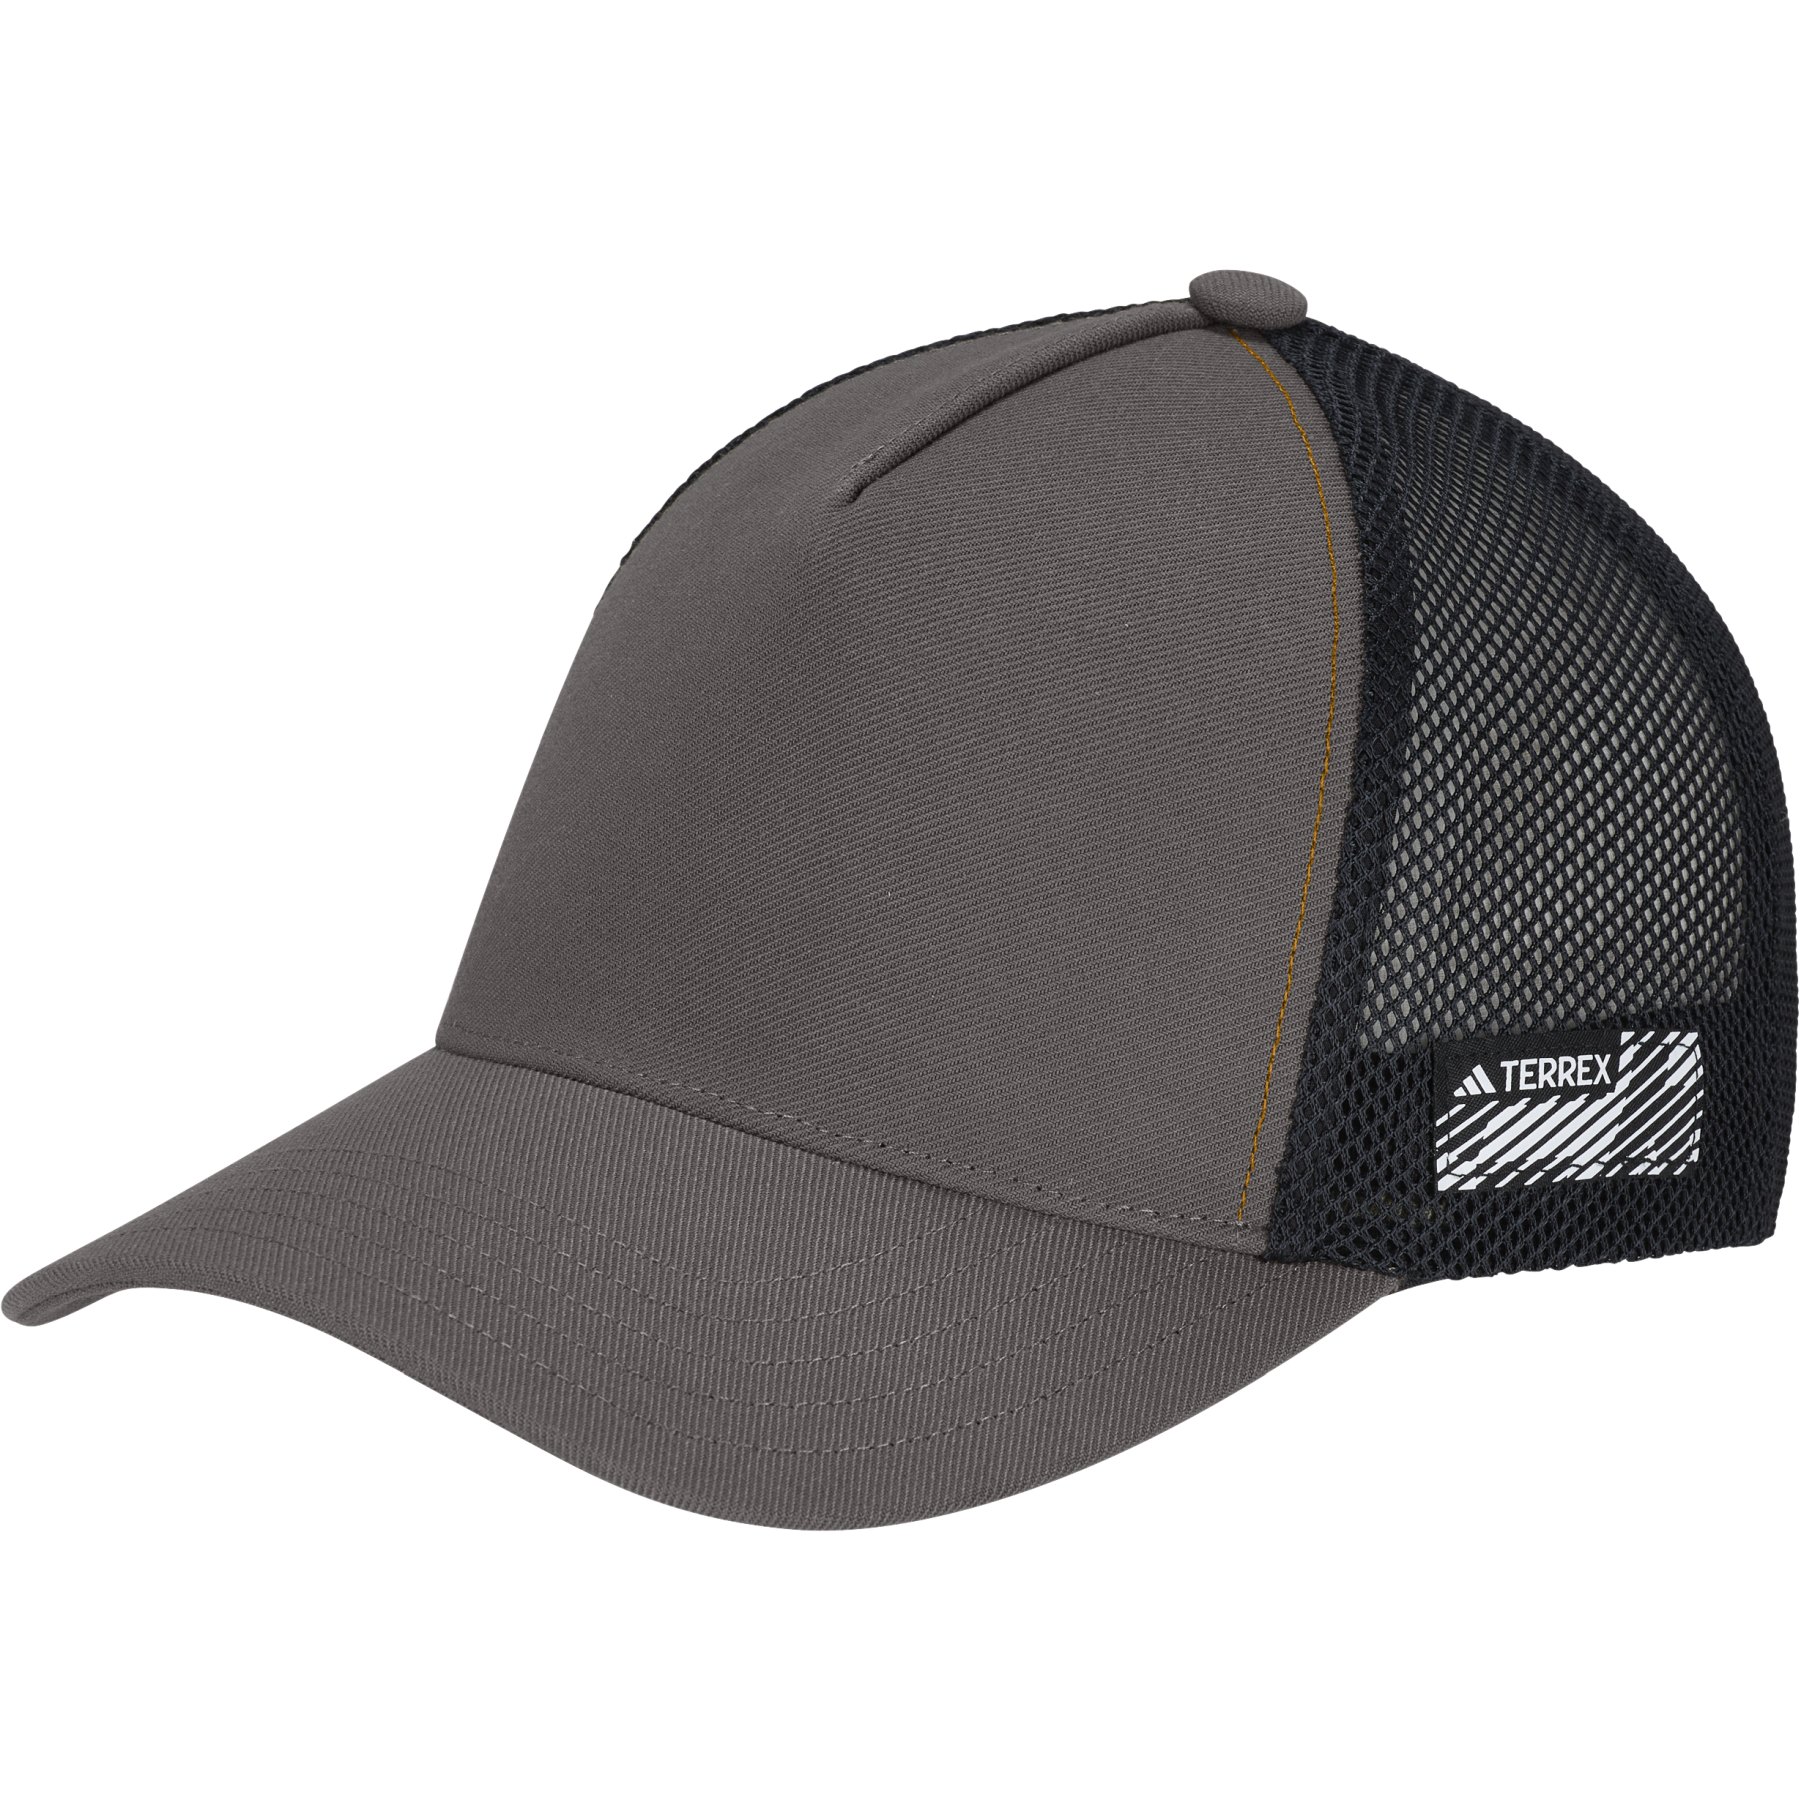 Picture of adidas TERREX Trucker Cap - charcoal/white/semi spark IN4635